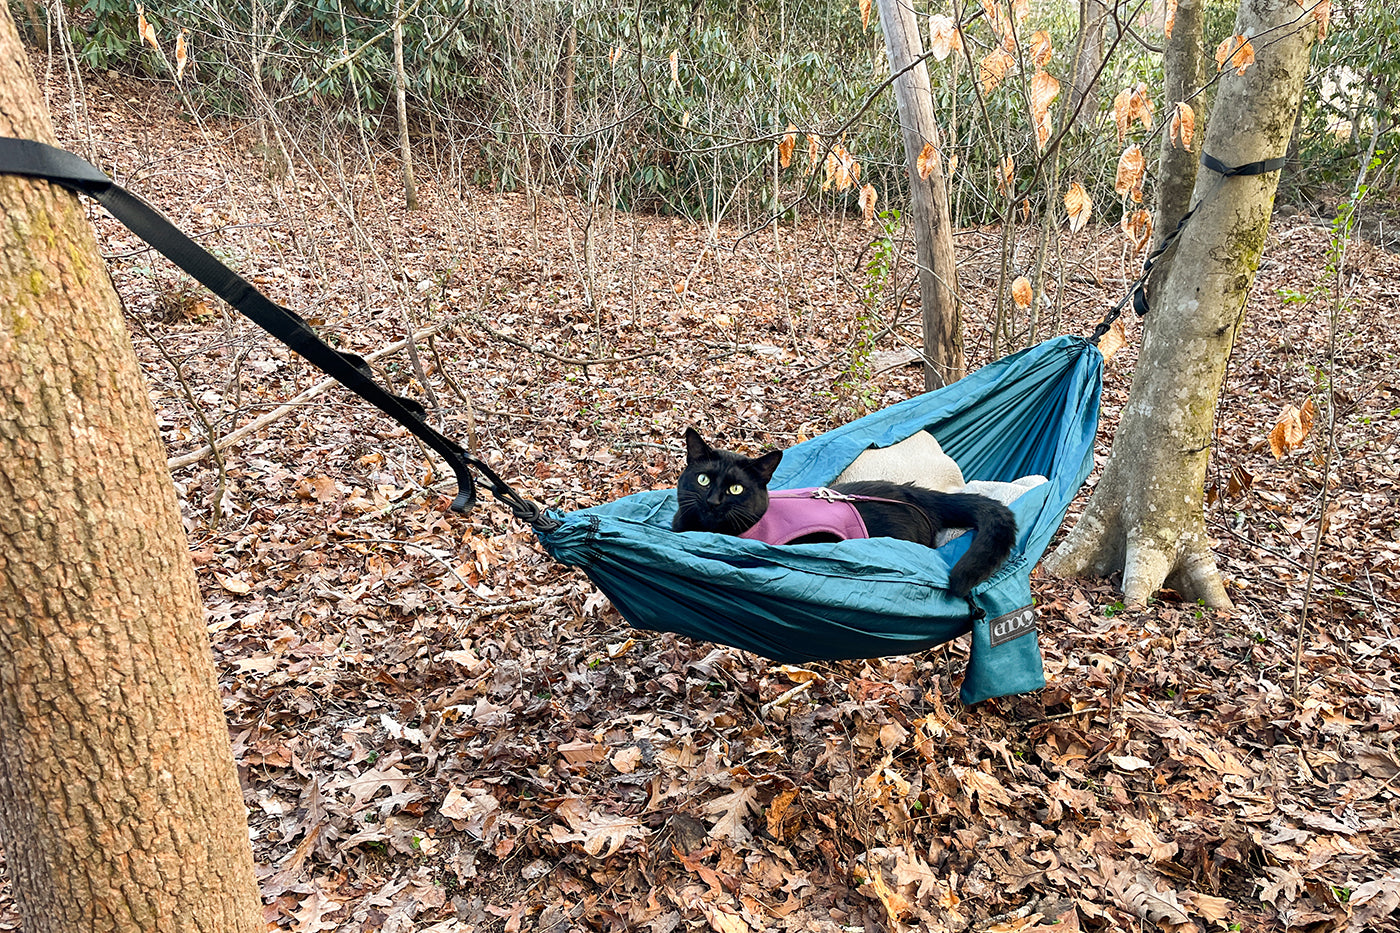 NEW! Pet Hammock + Straps Combo For Your Furry Friend